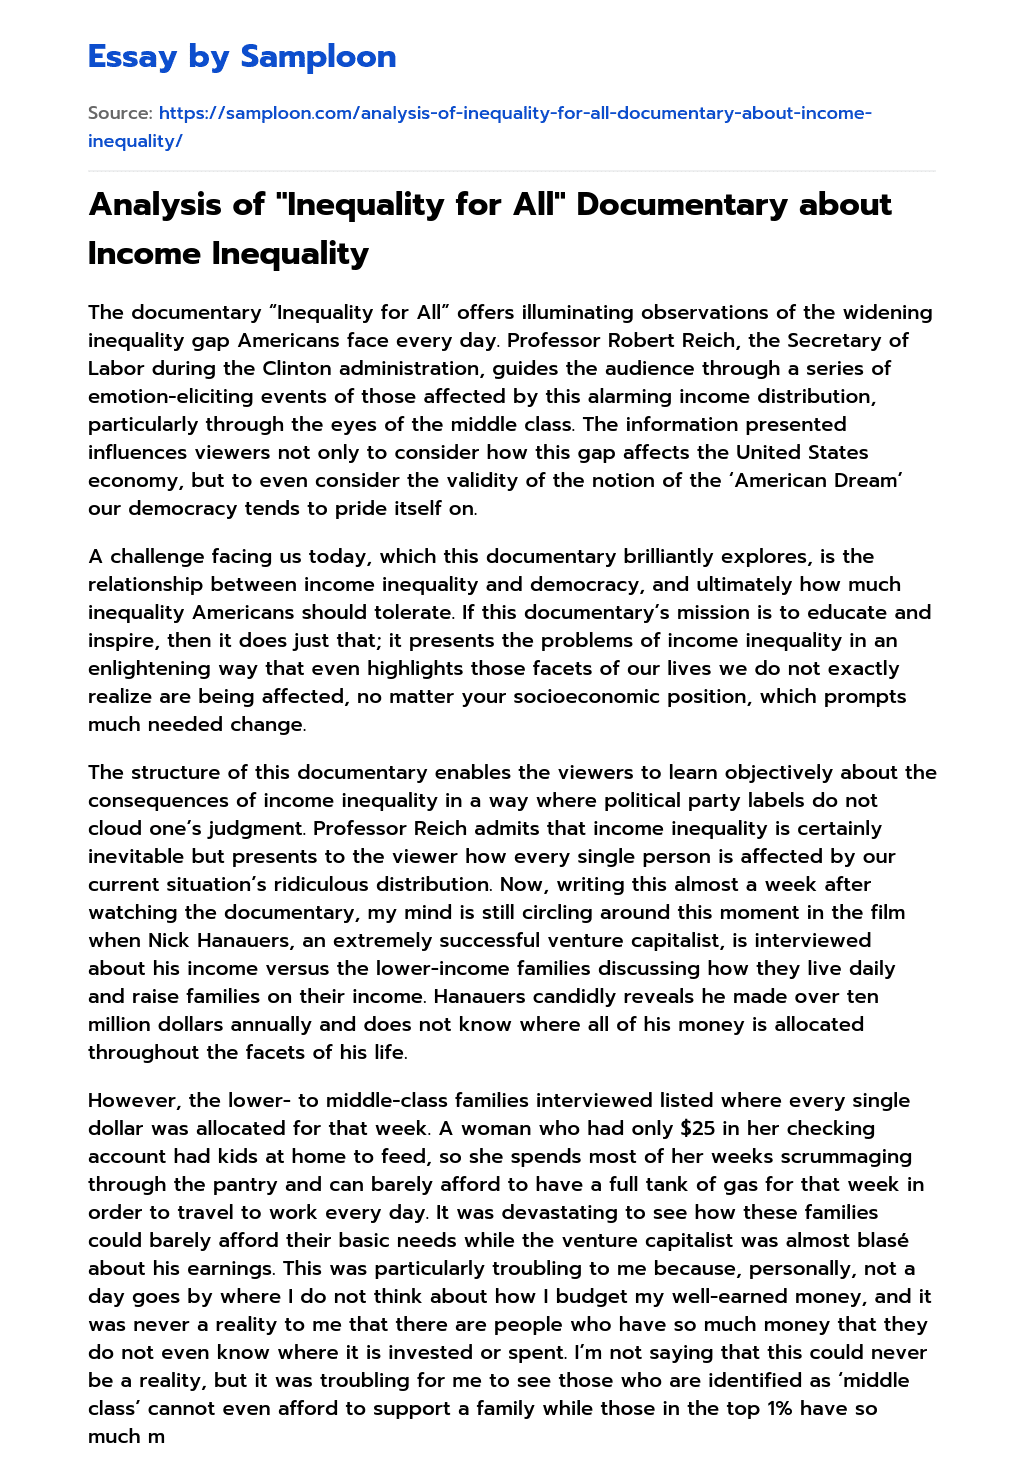 essay about income inequality